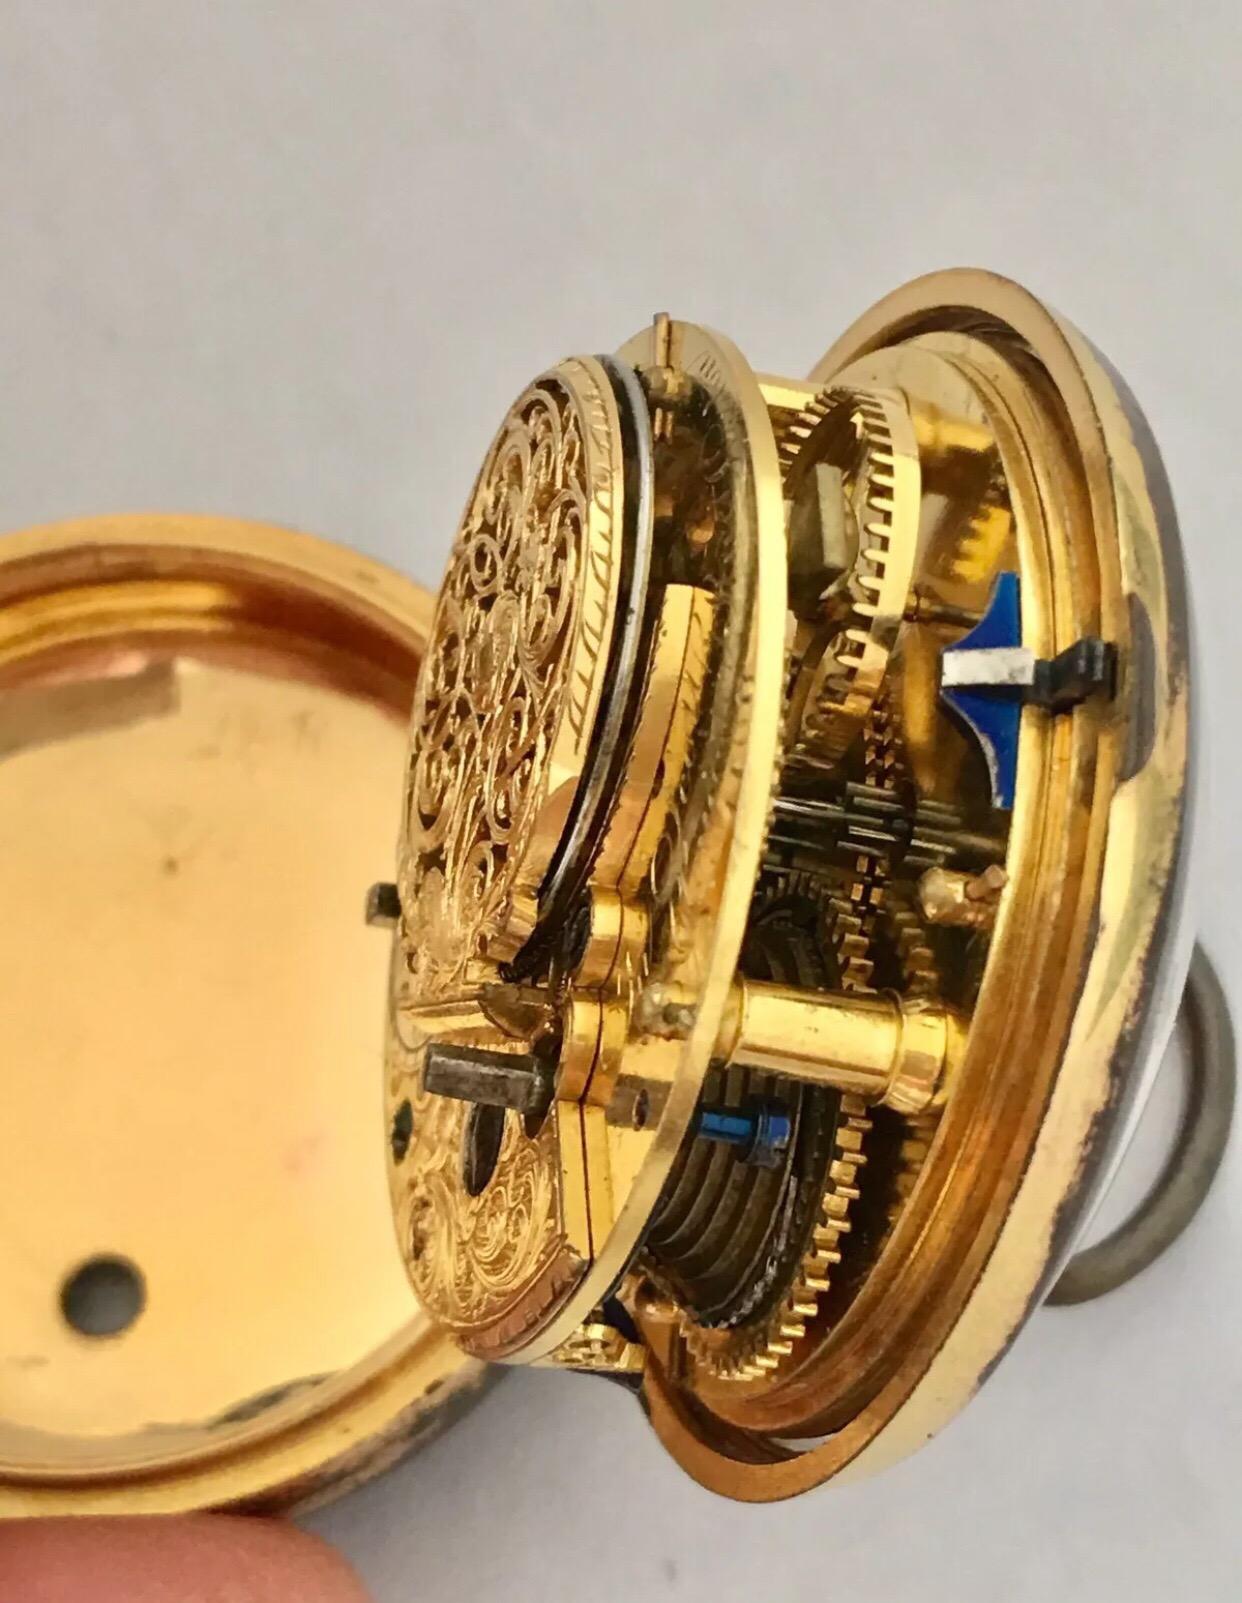 Early Verge Fusee Pocket Watch Signed John Scott, Gloucester Street, London In Fair Condition For Sale In Carlisle, GB